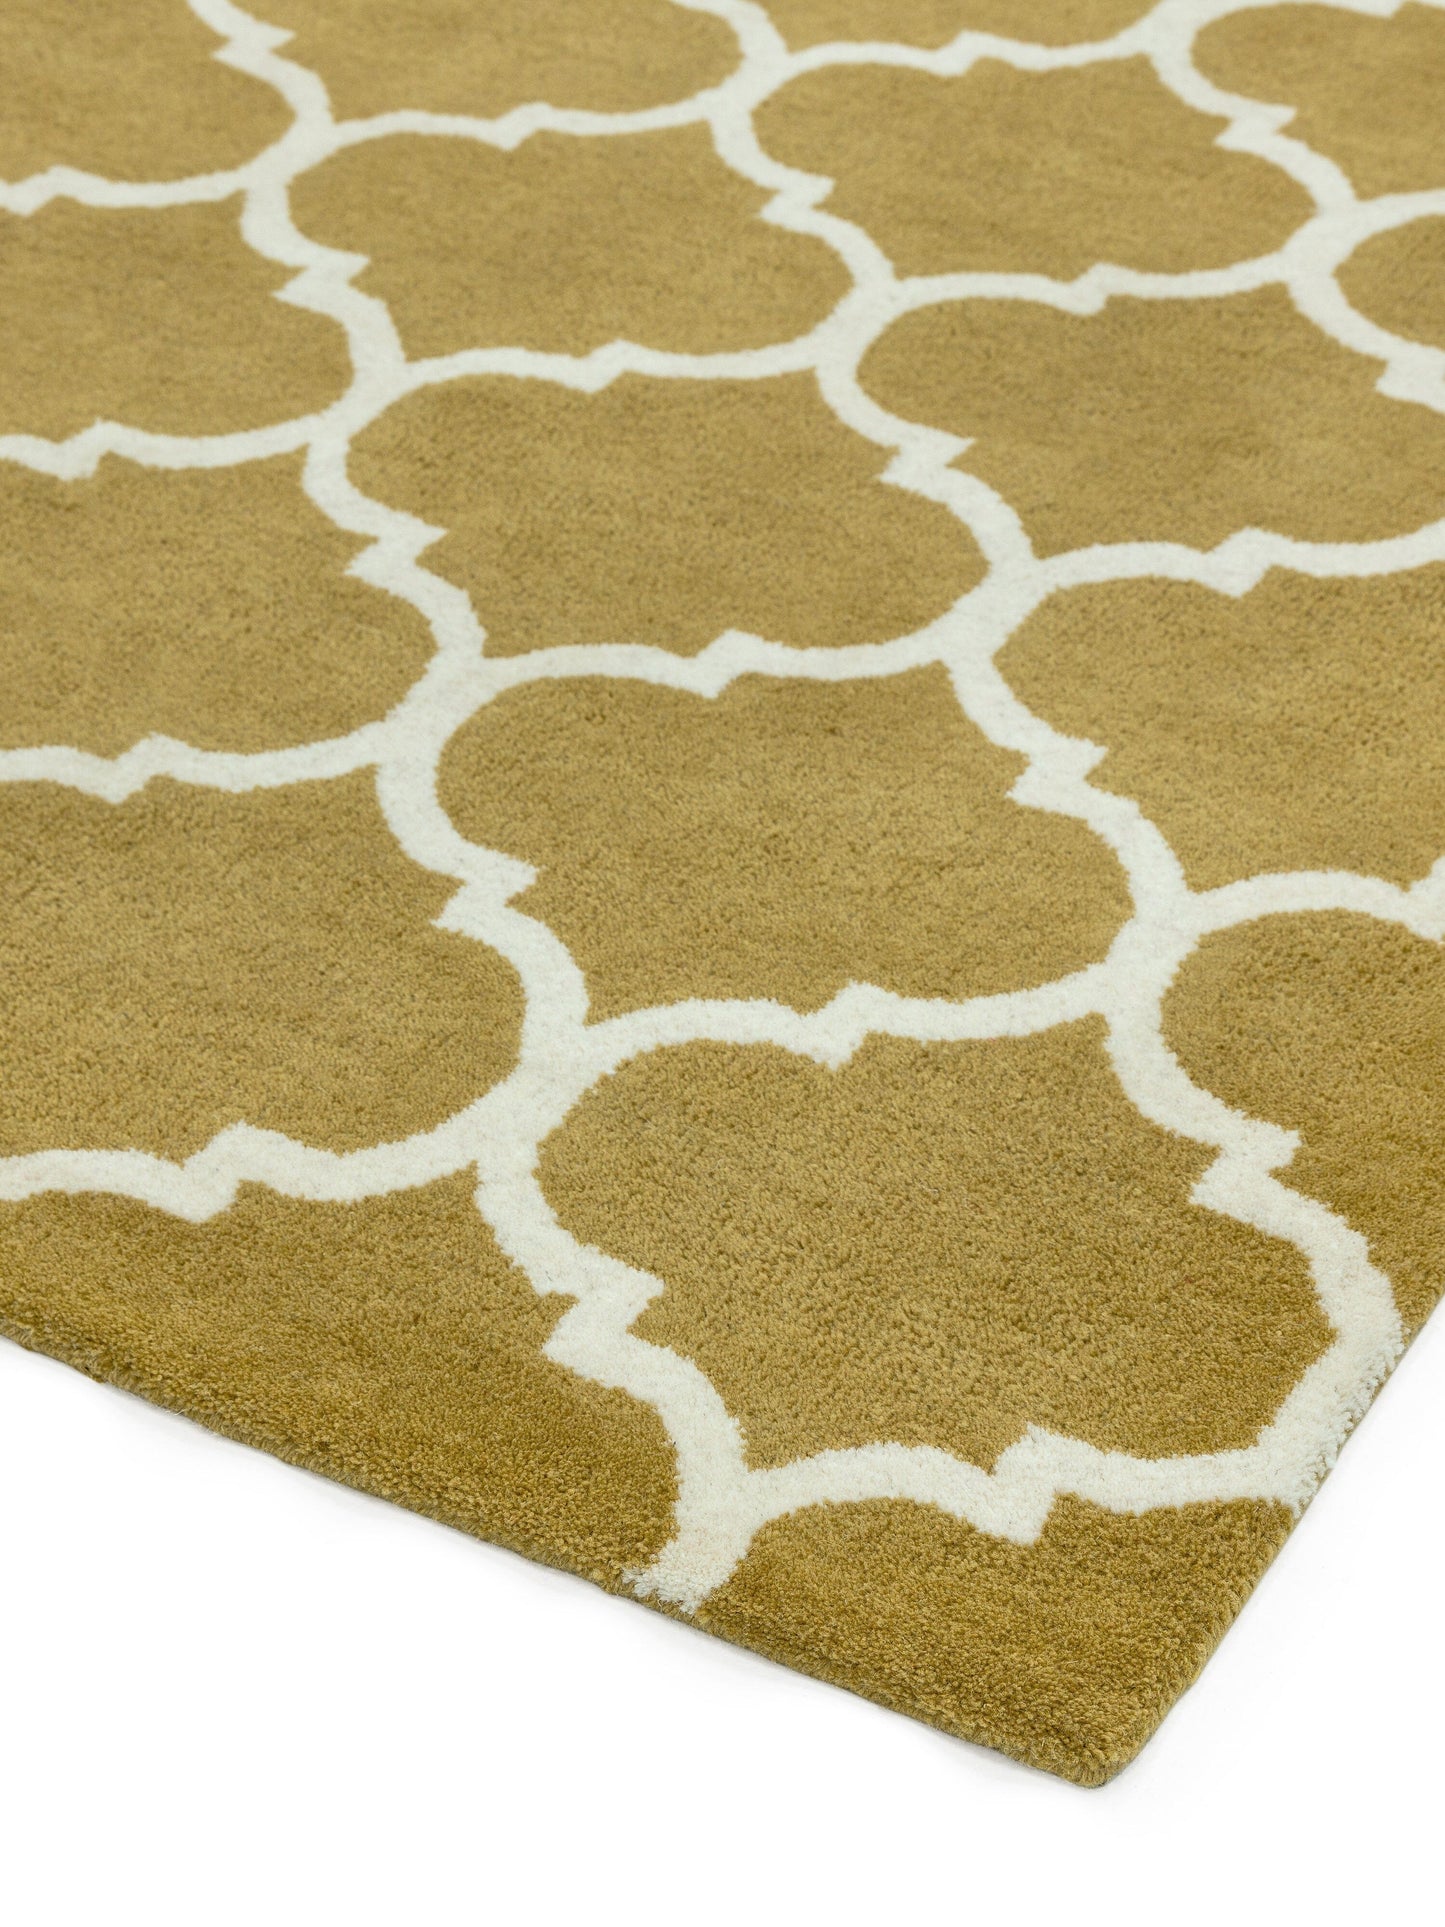 Asiatic Carpets Albany Handtufted Rug Ogee Ochre - 80 x 150cm